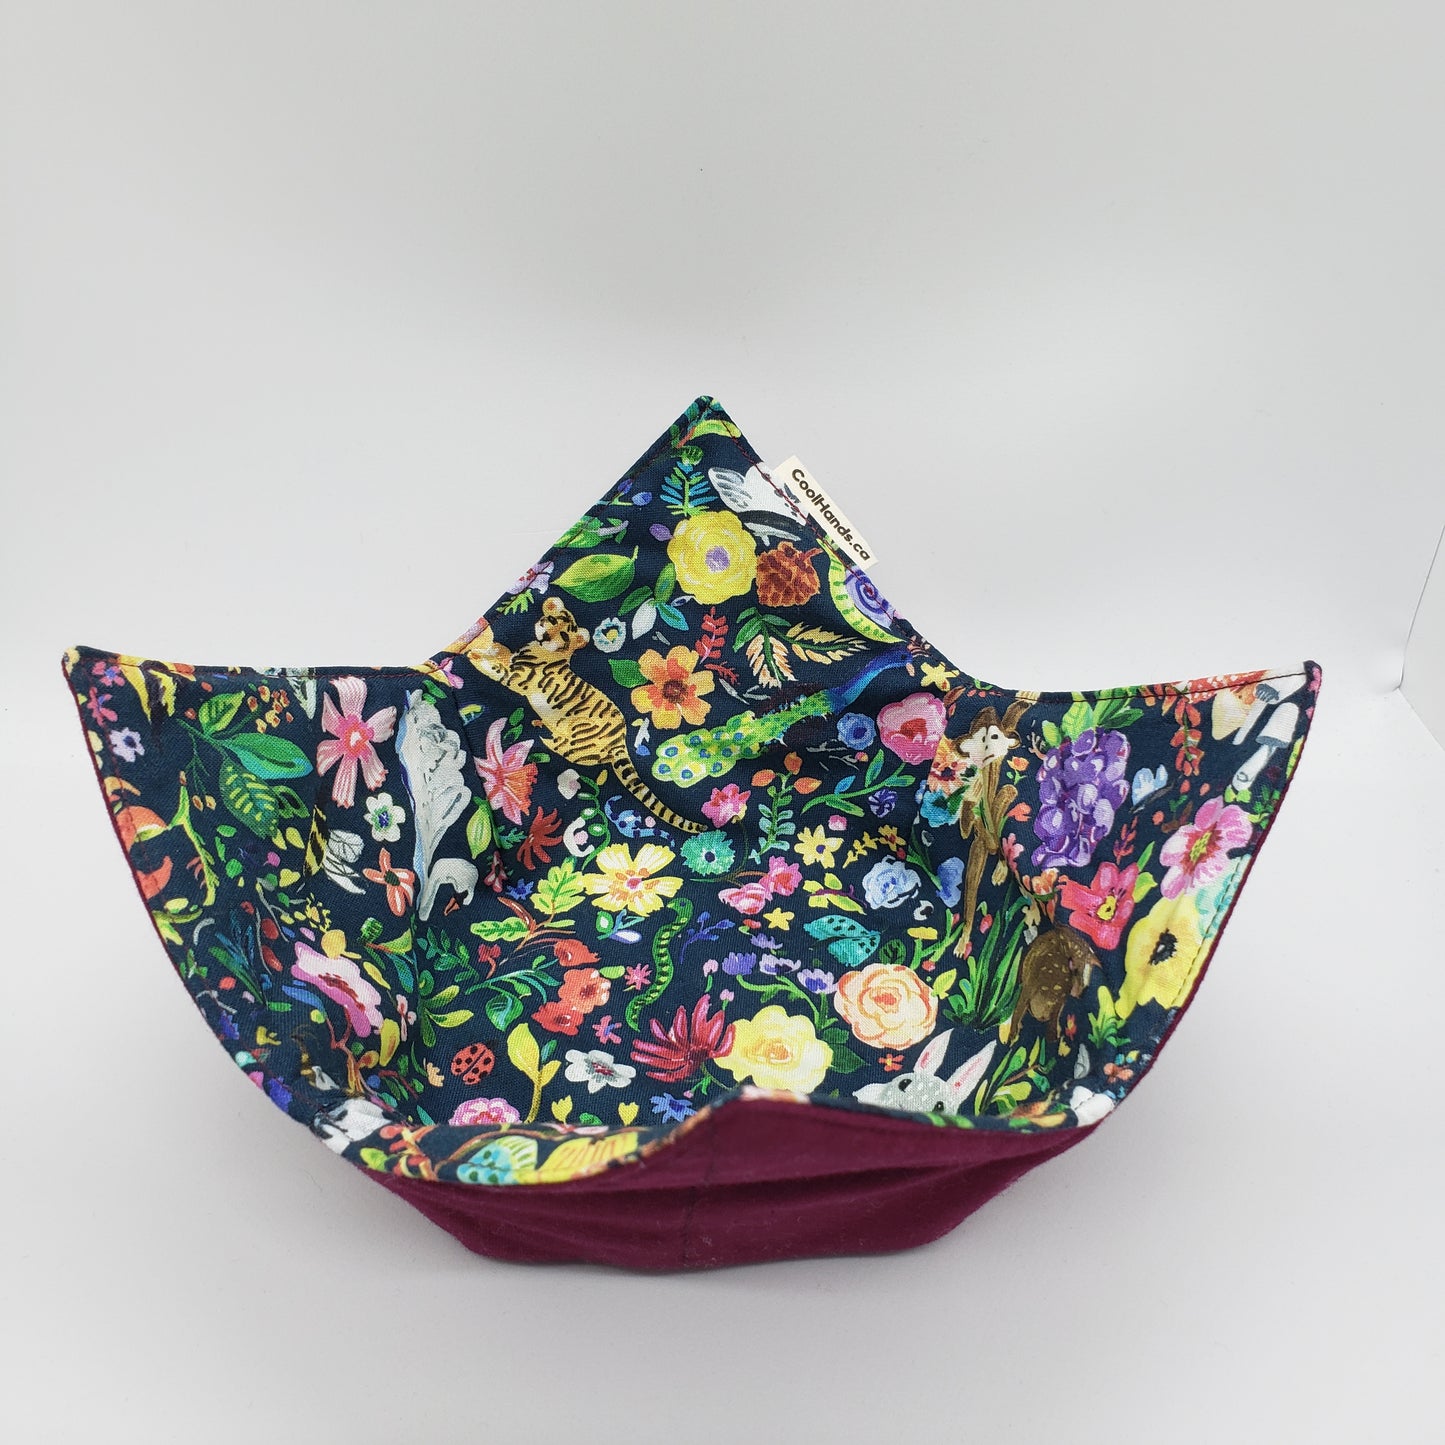 100% Cotton Microwavable Bowl Cozy - Enchanted Forest